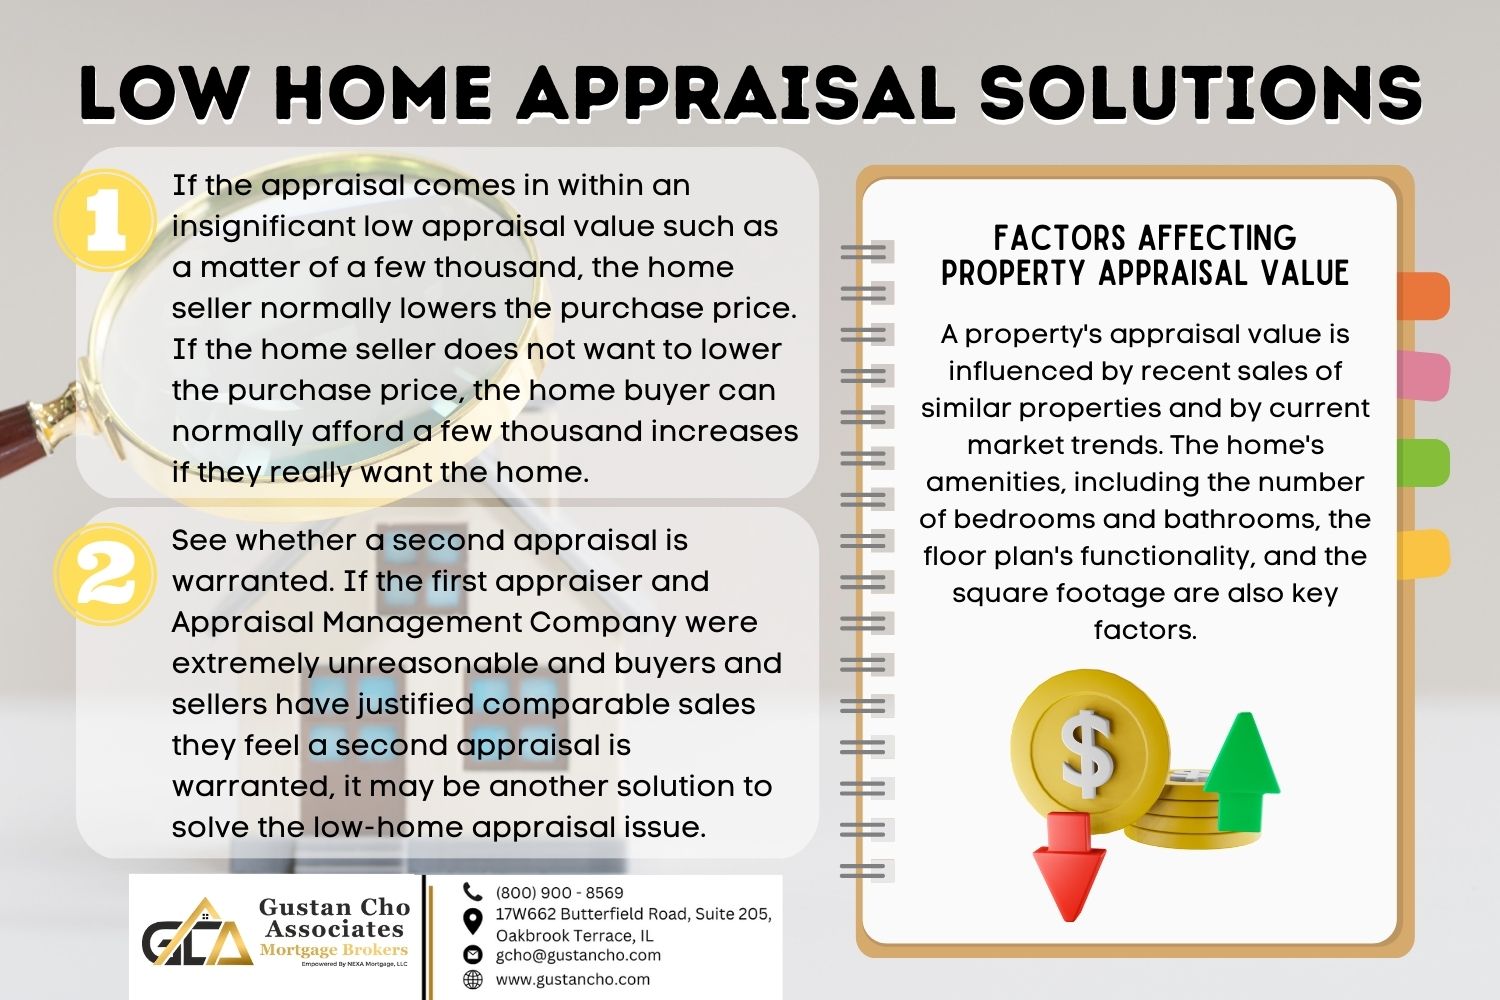 Low-Home Appraisal Solutions for Homebuyers and Sellers